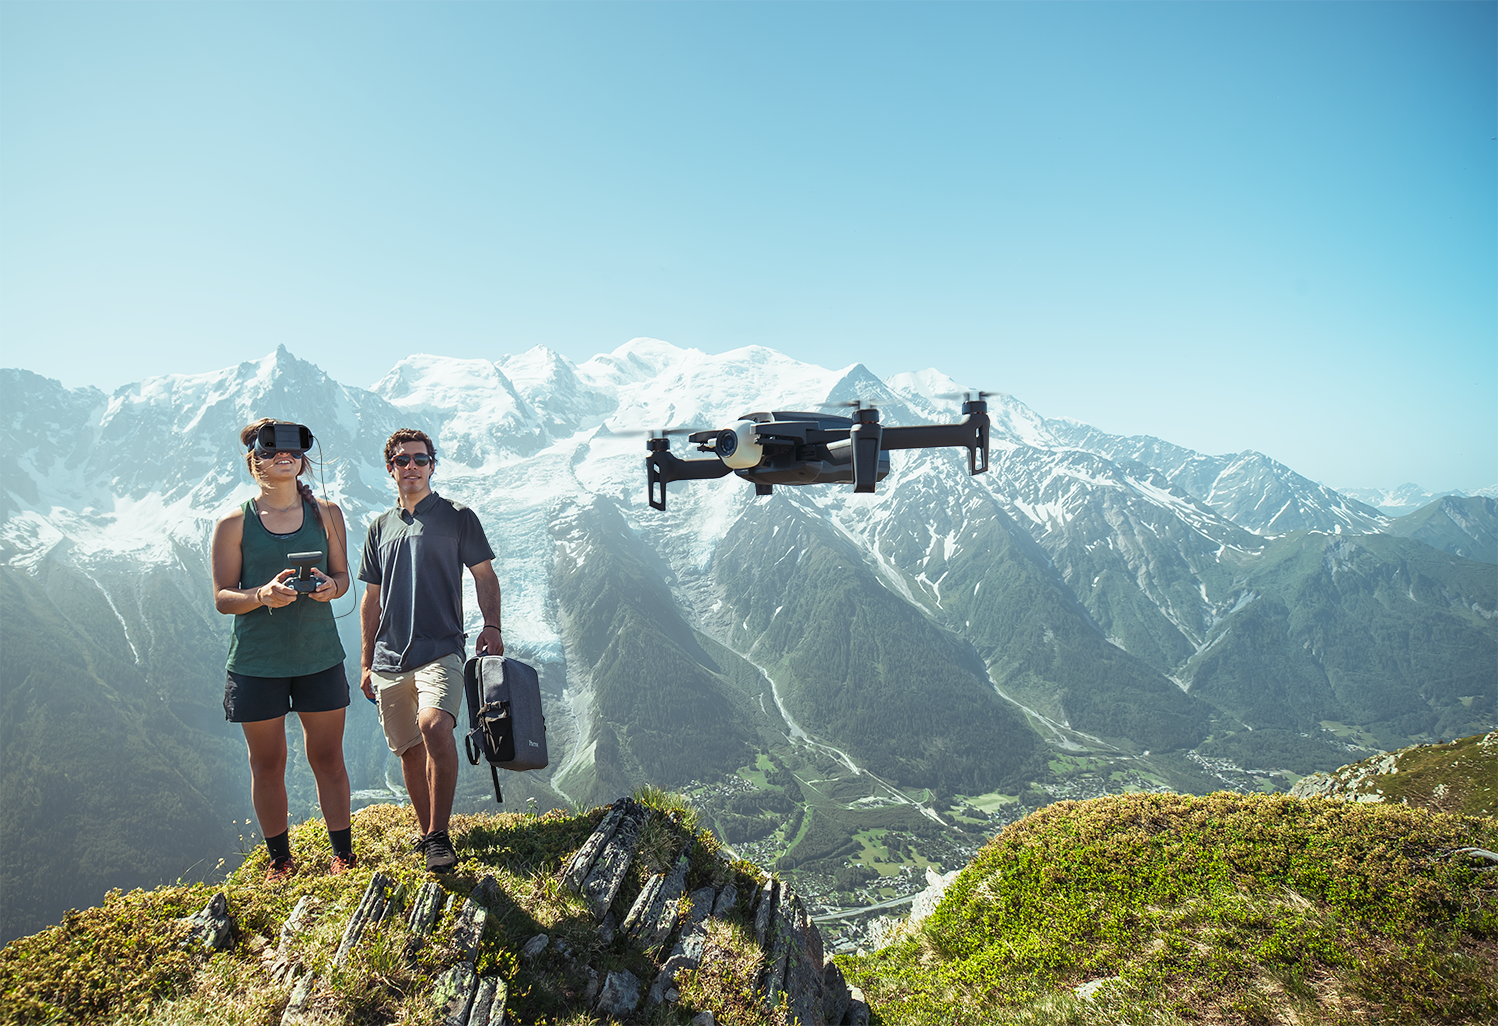 Two people flying a large drone in the foreground, with snow-capped mountains in the background